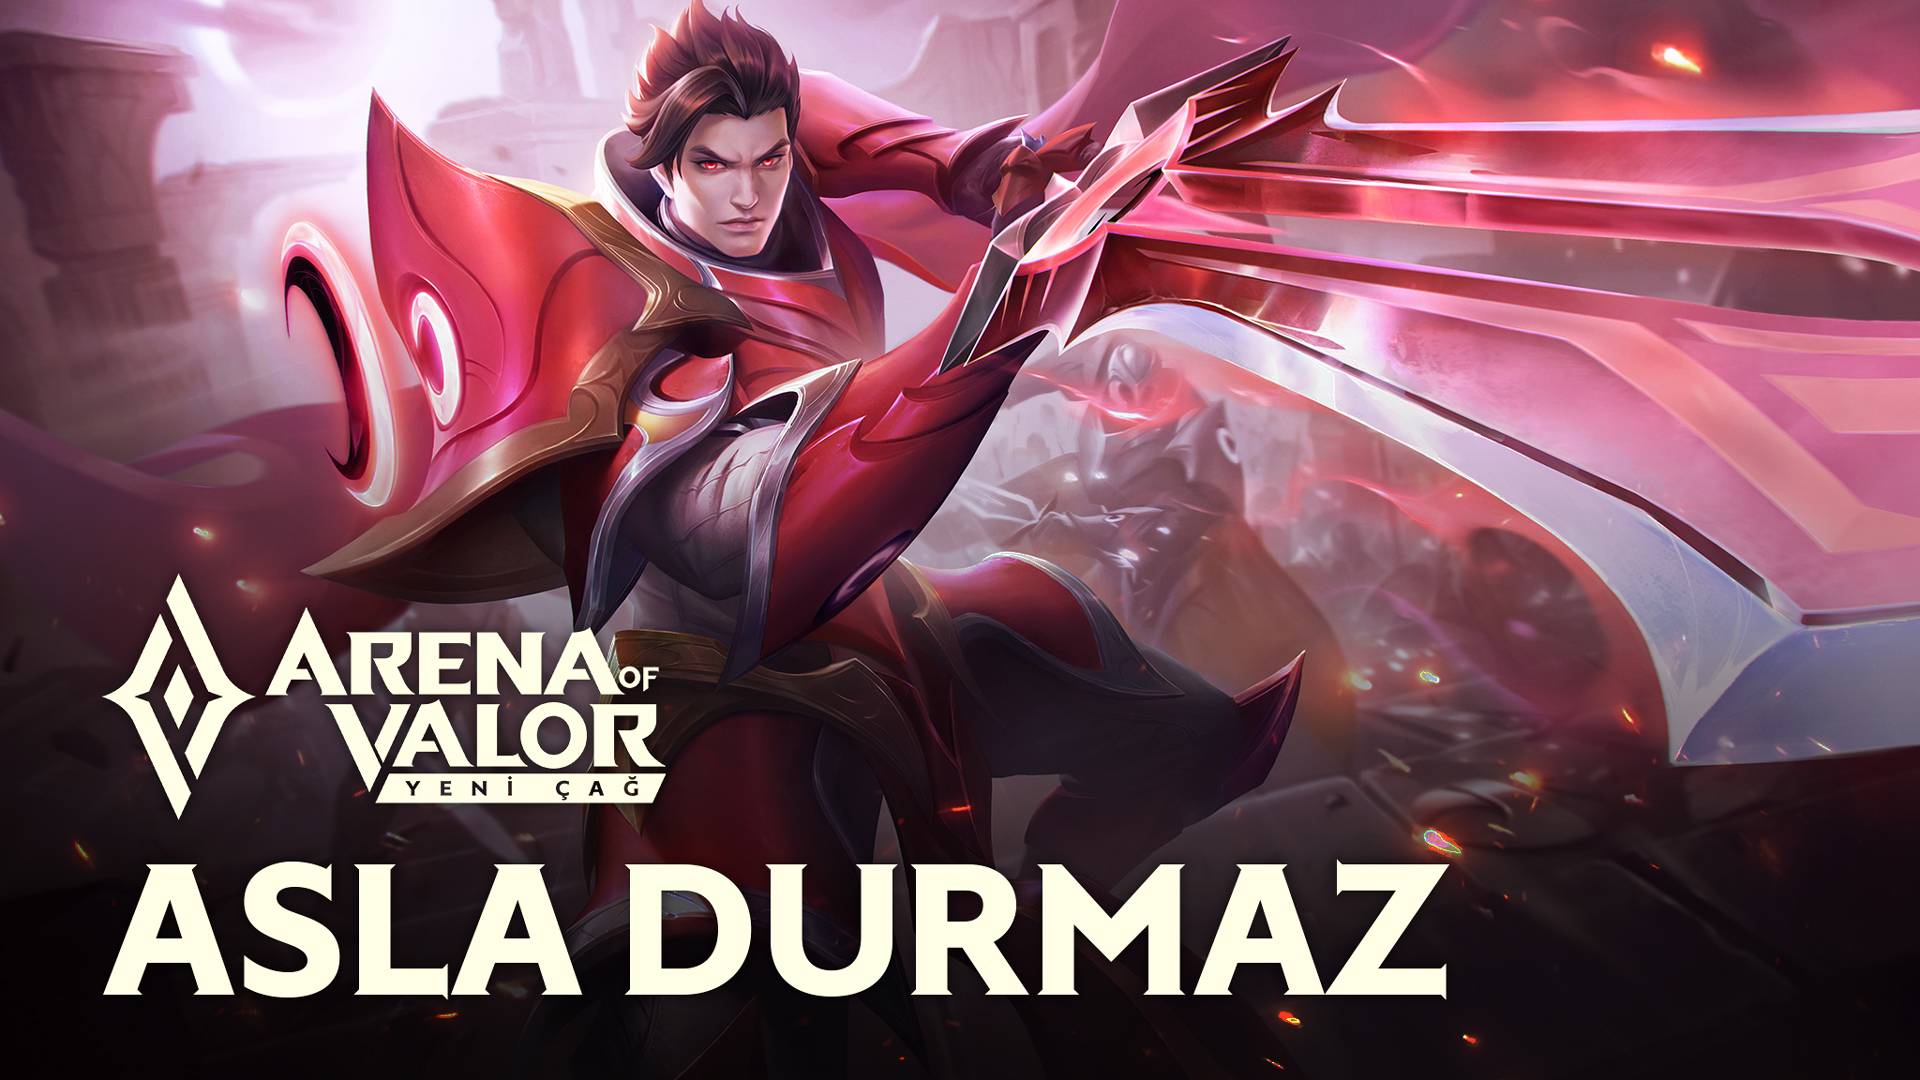 1634886681 Arena of Valor Yeni Cag